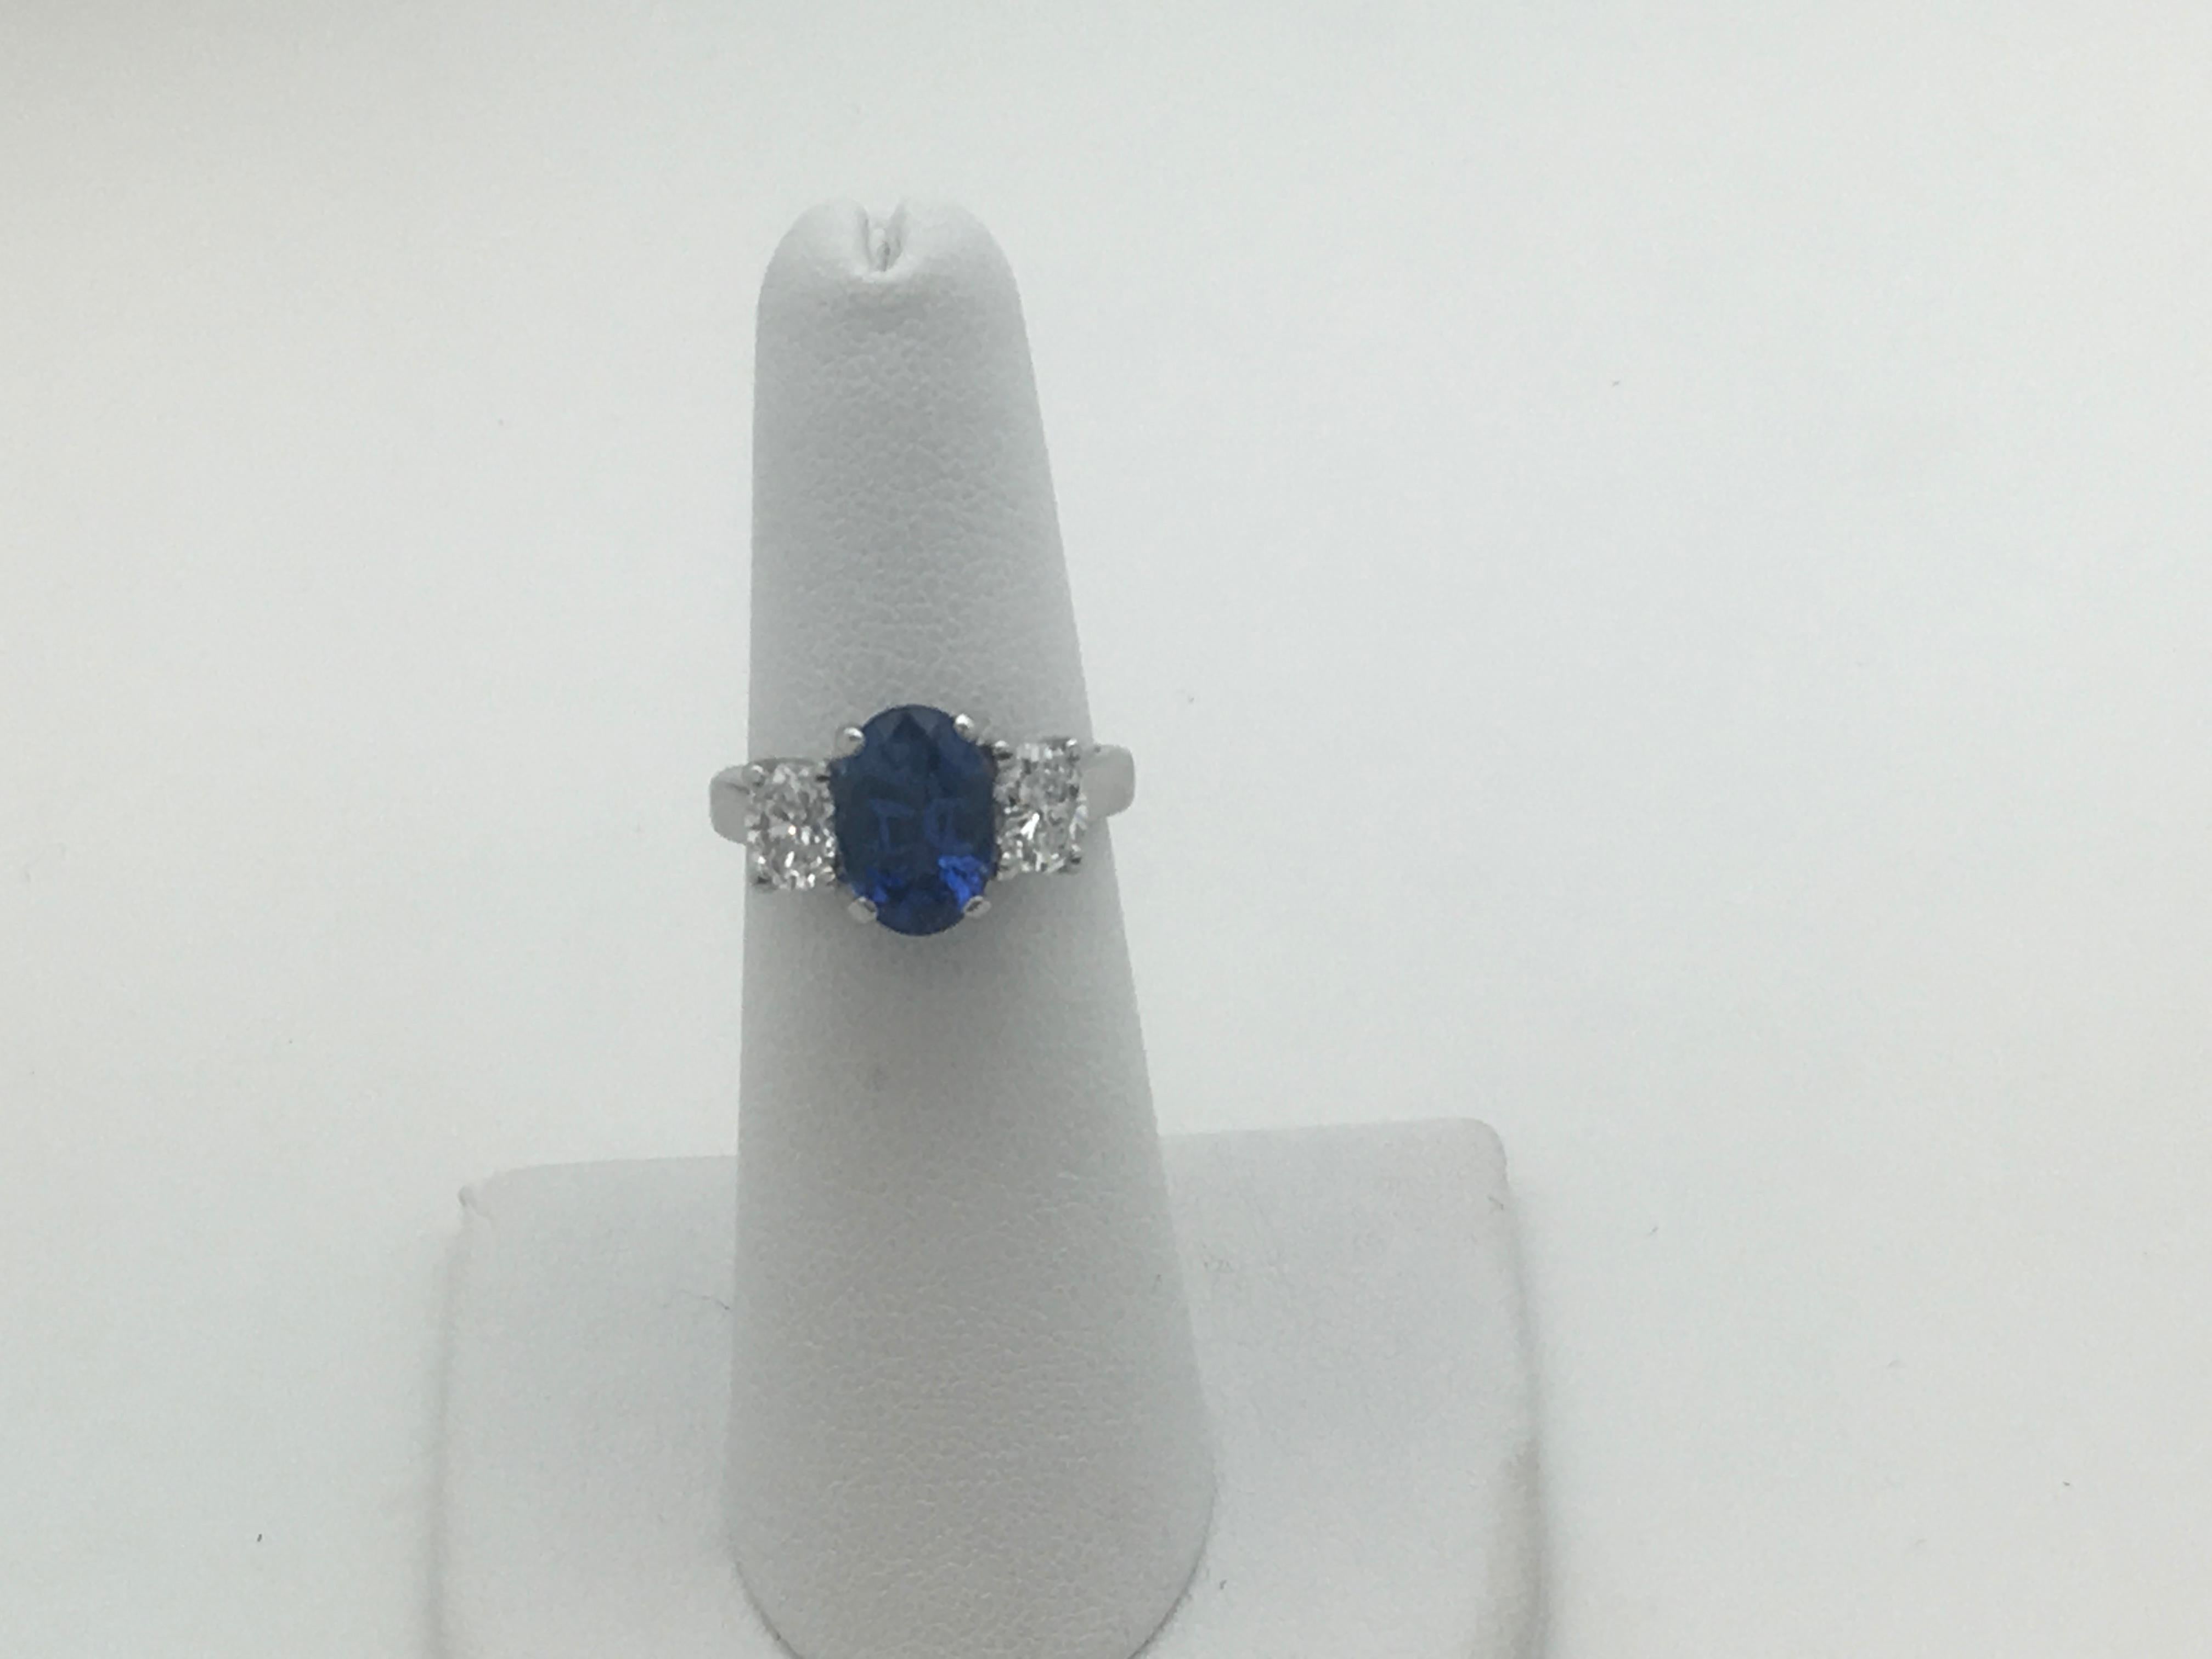 Platinum three gemstone stone ring. The center  Oval shape Blue Sapphire is 3.15 Carats ( scale weight). The Hue: Blue with Lavender undertones, Intensity: Vivid, Tone: Medium. The color is even through the Sapphire..
Two oval shape Diamonds